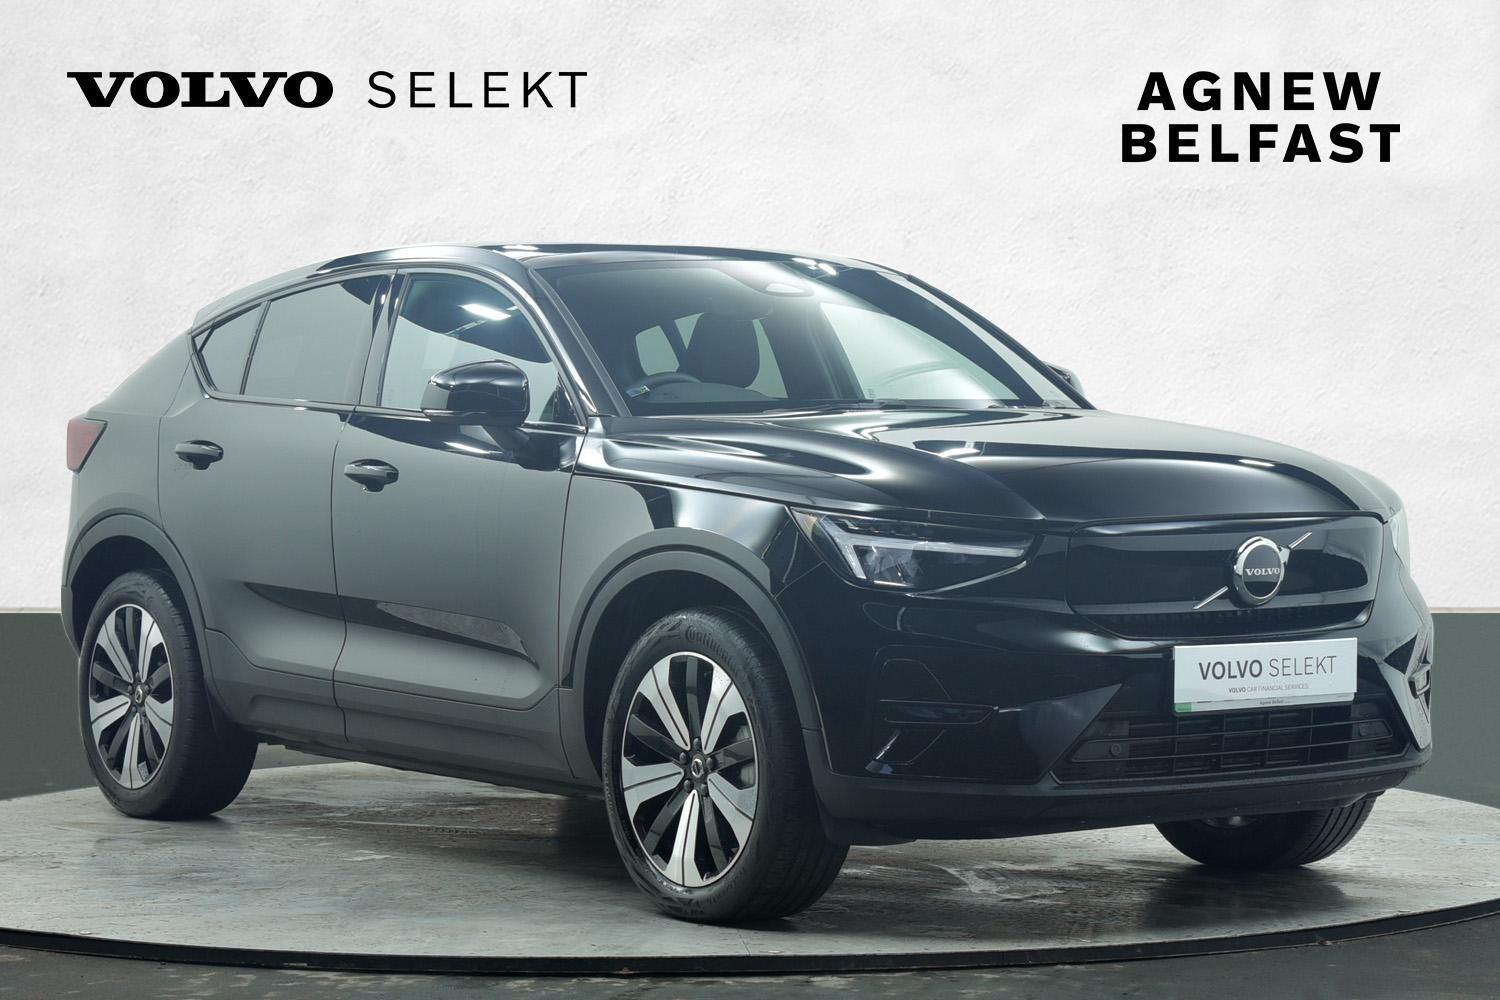 Used Volvo Selekt Volvo C40 Plus (in black) available for purchase at Agnew Volvo Belfast